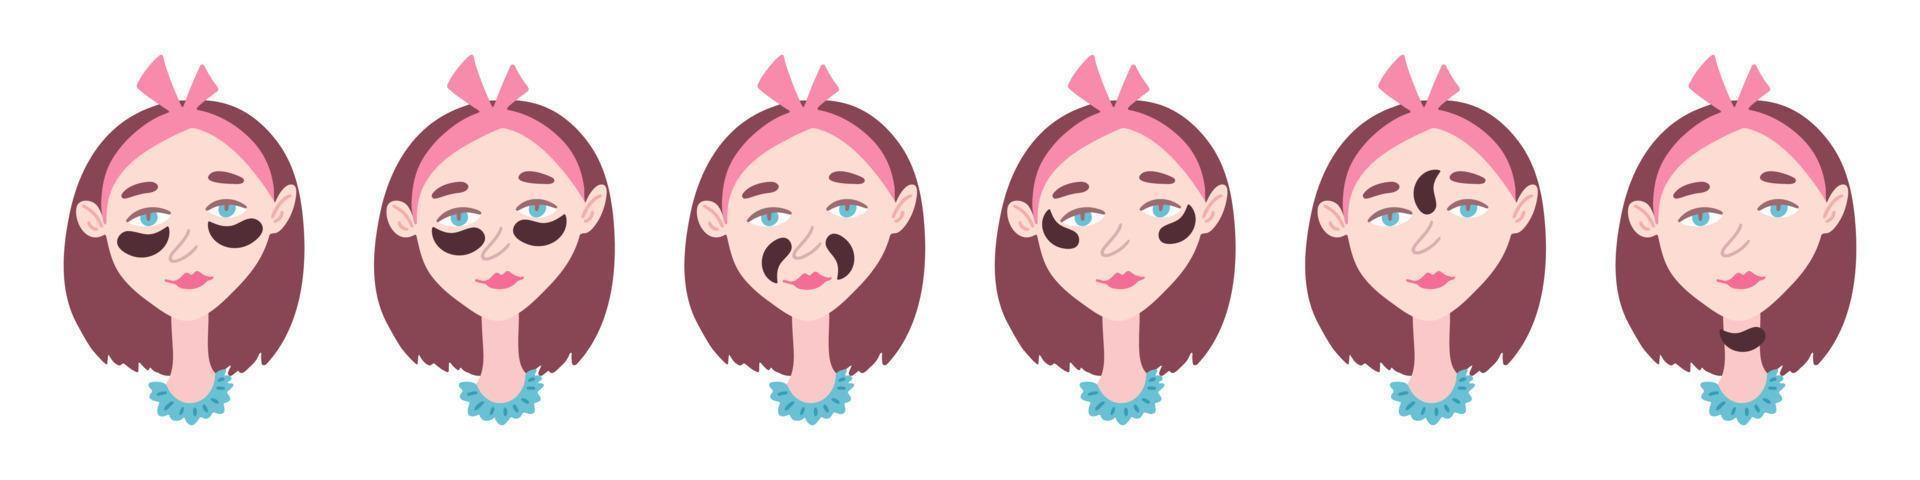 Using cosmetic eye patches. Options for using hydrogel patches. Korean cosmetics beauty concept. Vector illustration with female character, in hand drawn style